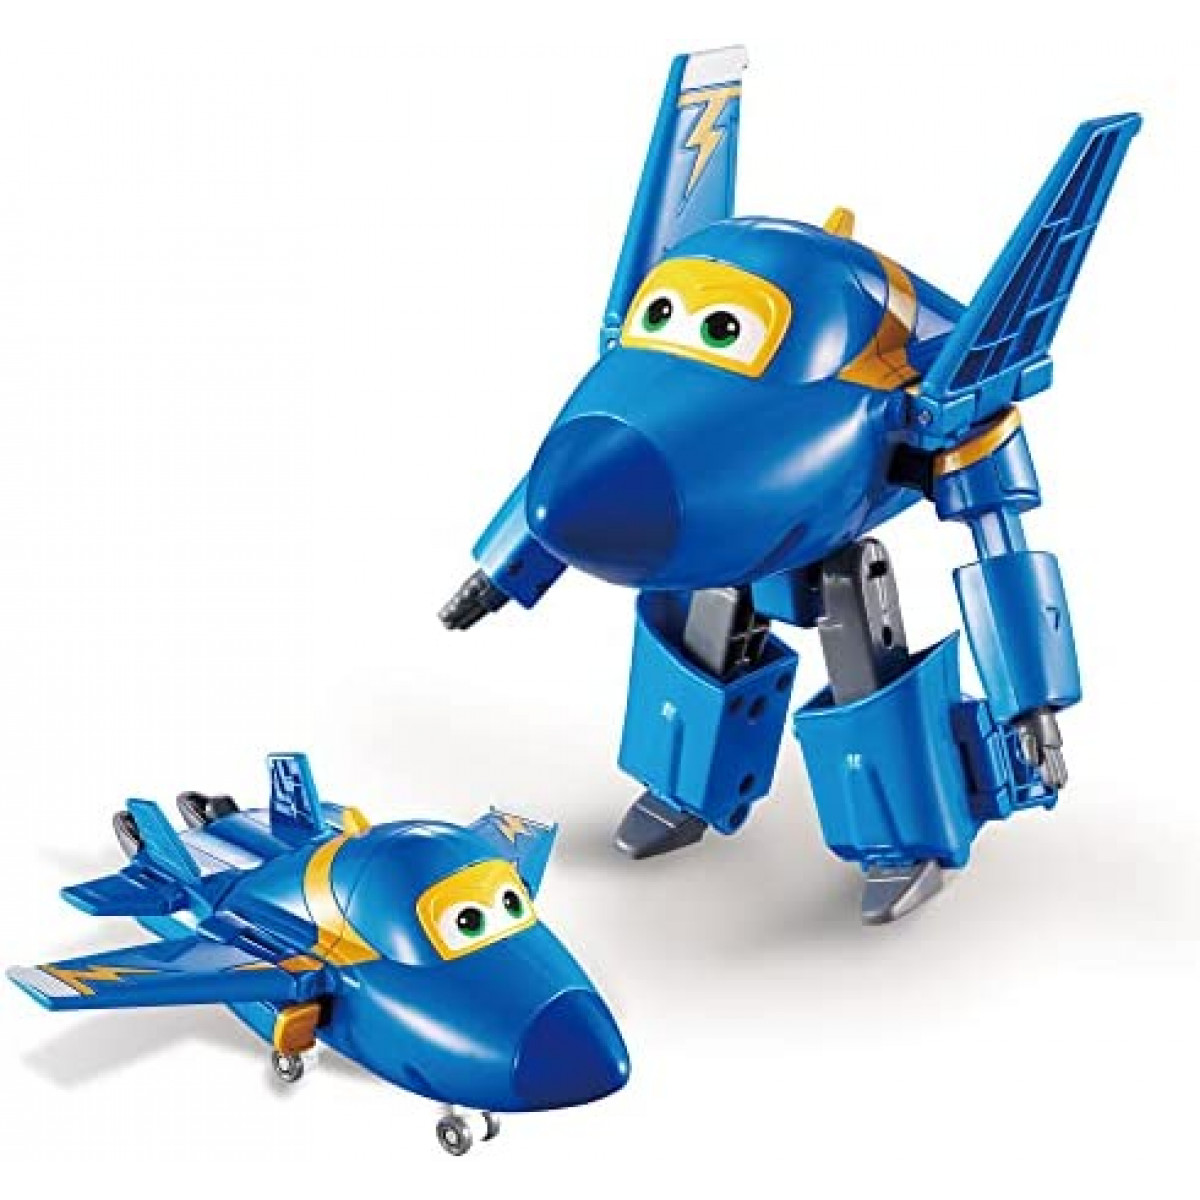 Super Wings 5 Transforming Golden Boy Airplane Toys, India